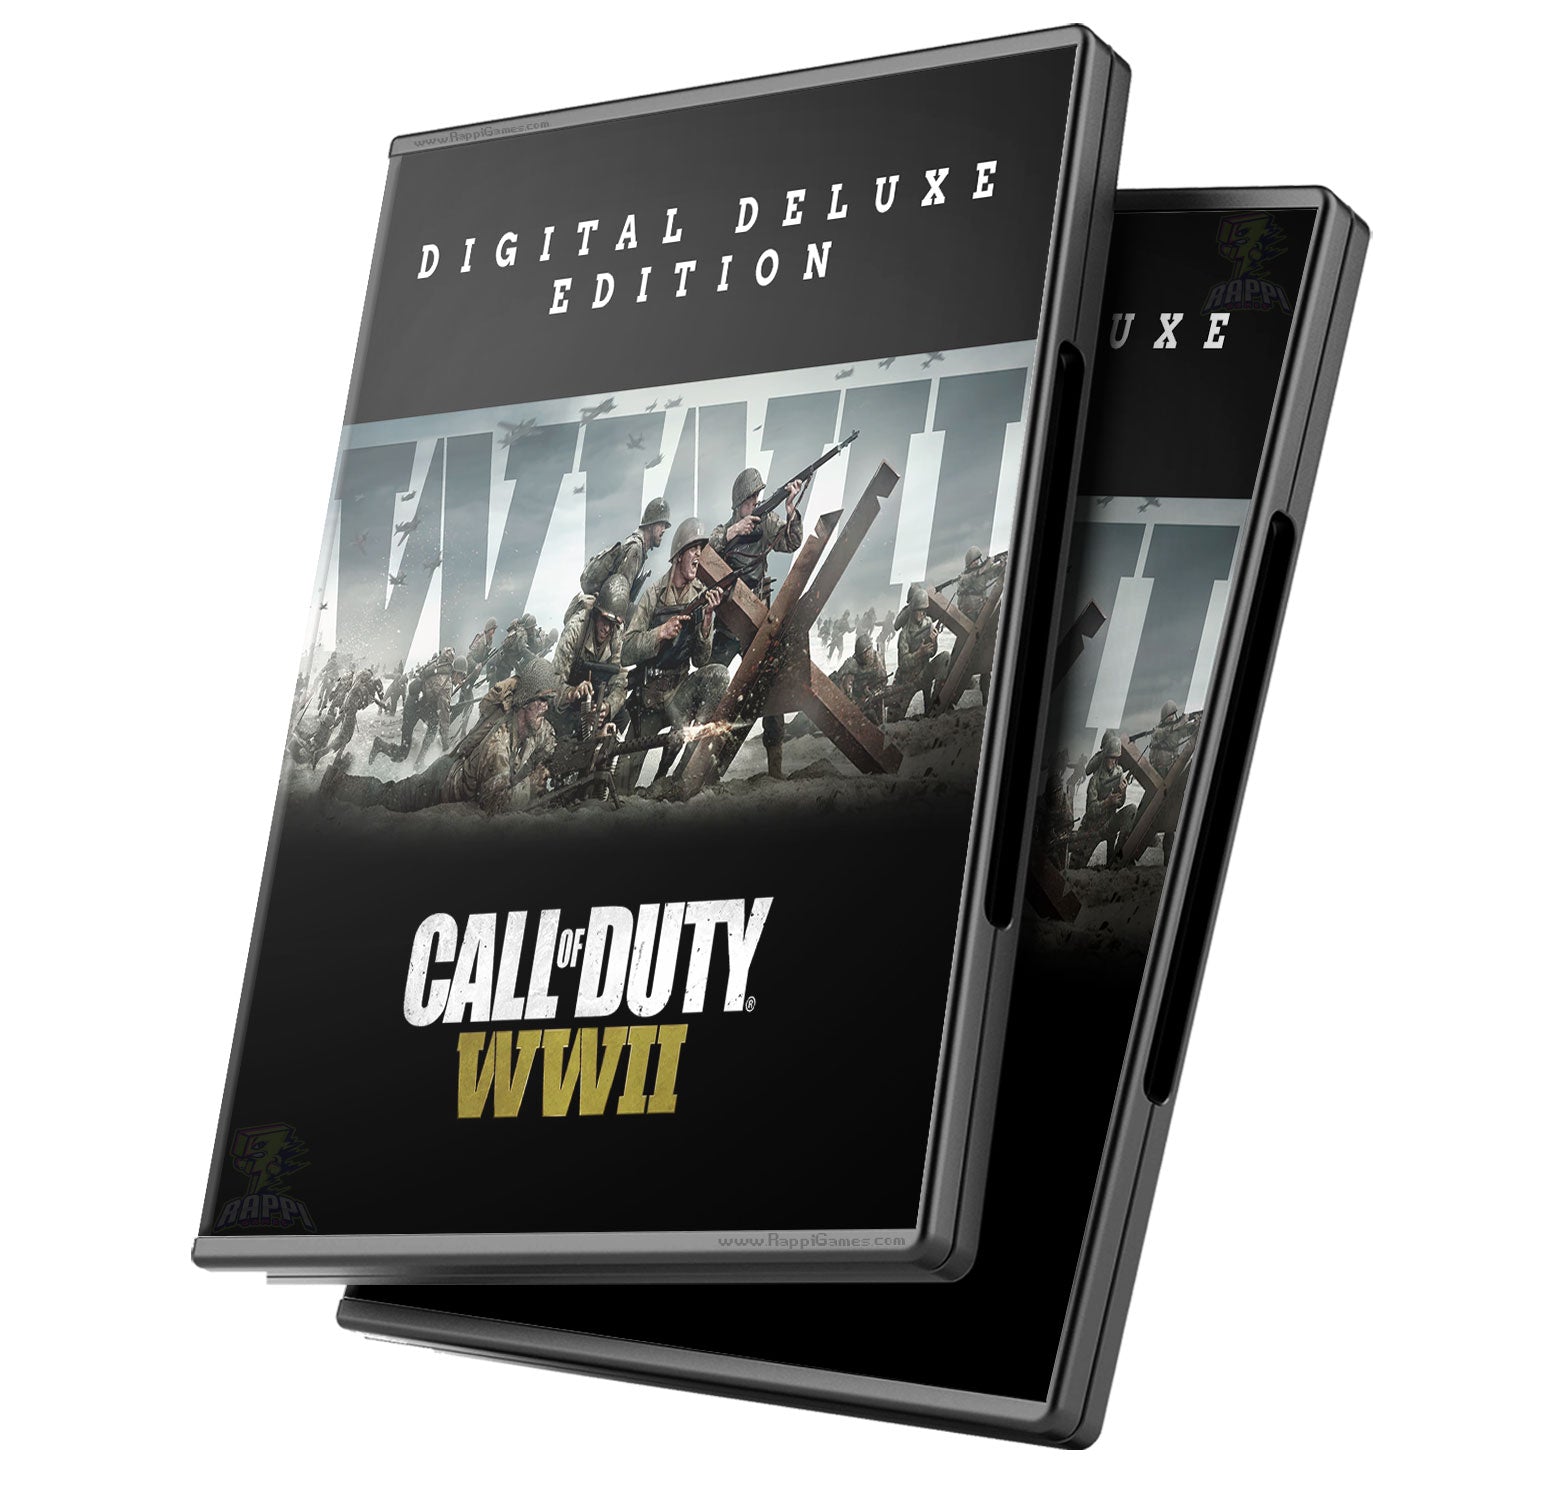 Call Of Duty Ww2 - Deluxe Edition - Incluye Zombies y Multiplayer - PC